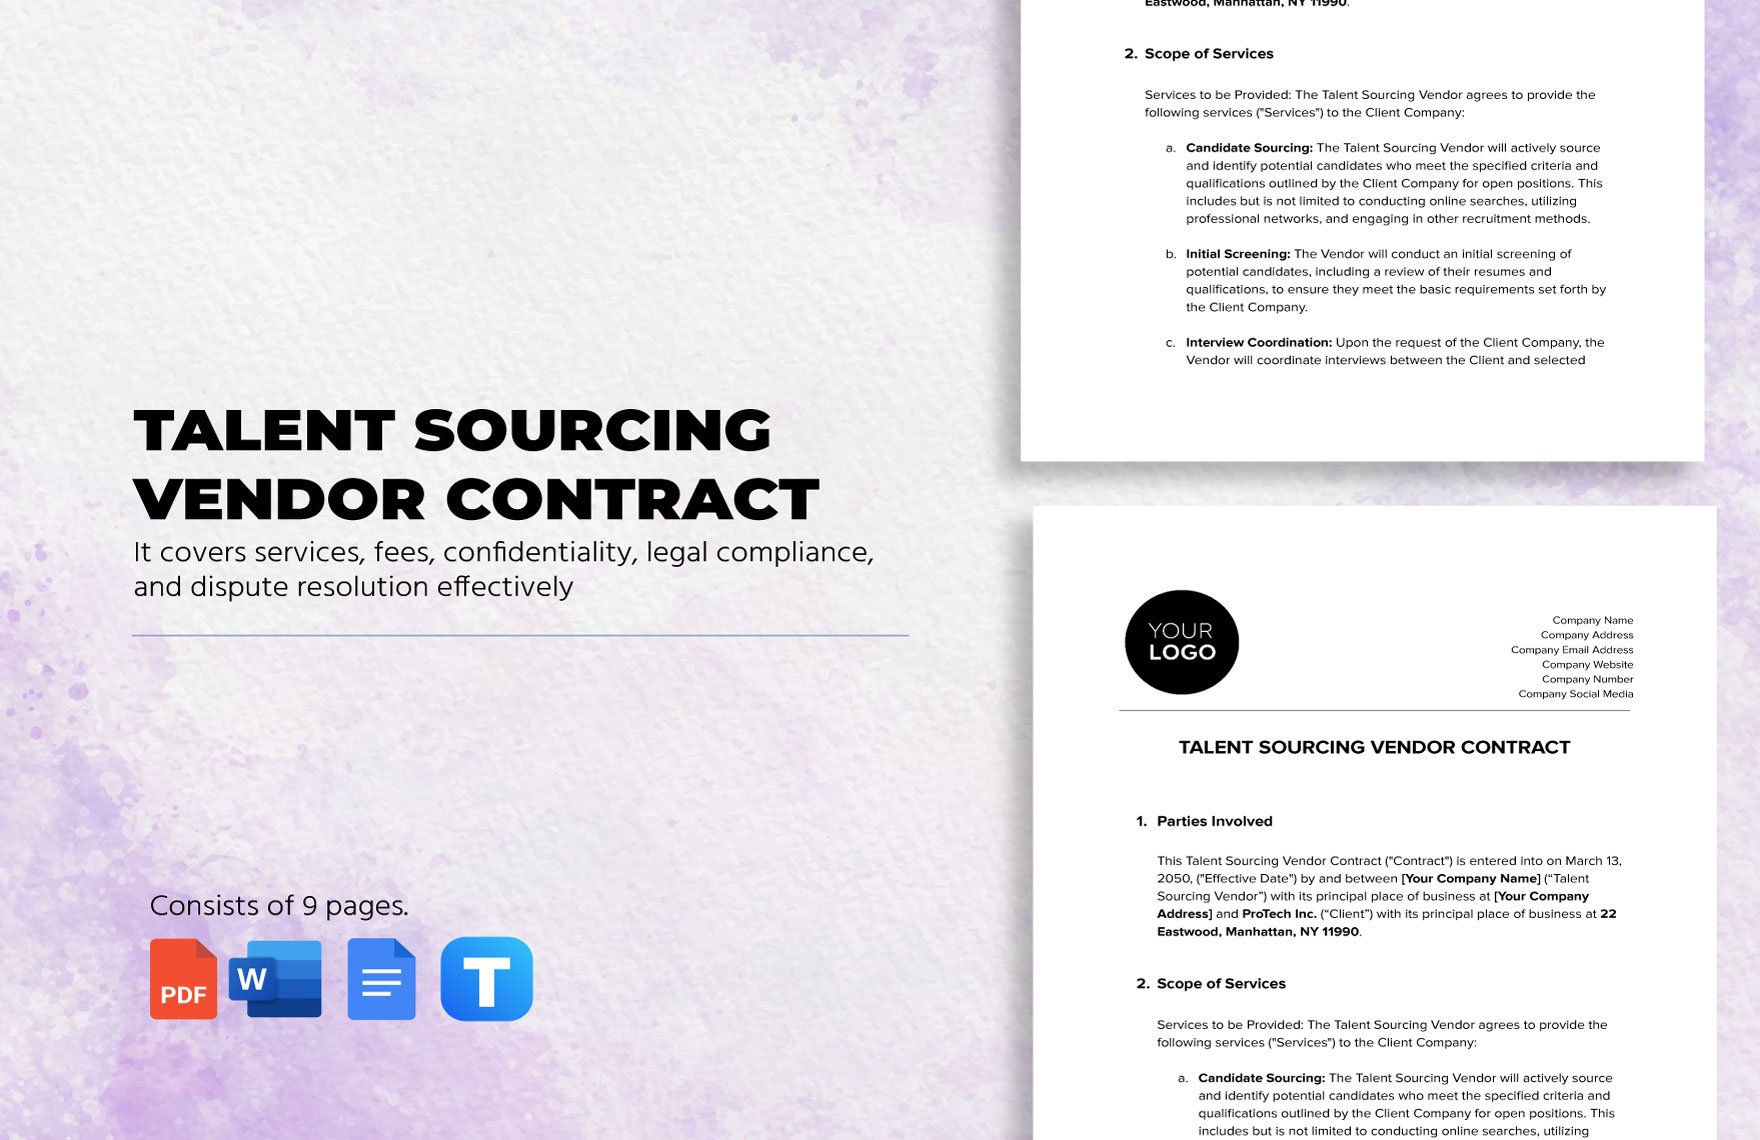 Talent Sourcing Vendor Contract HR Template in Word, Google Docs, PDF